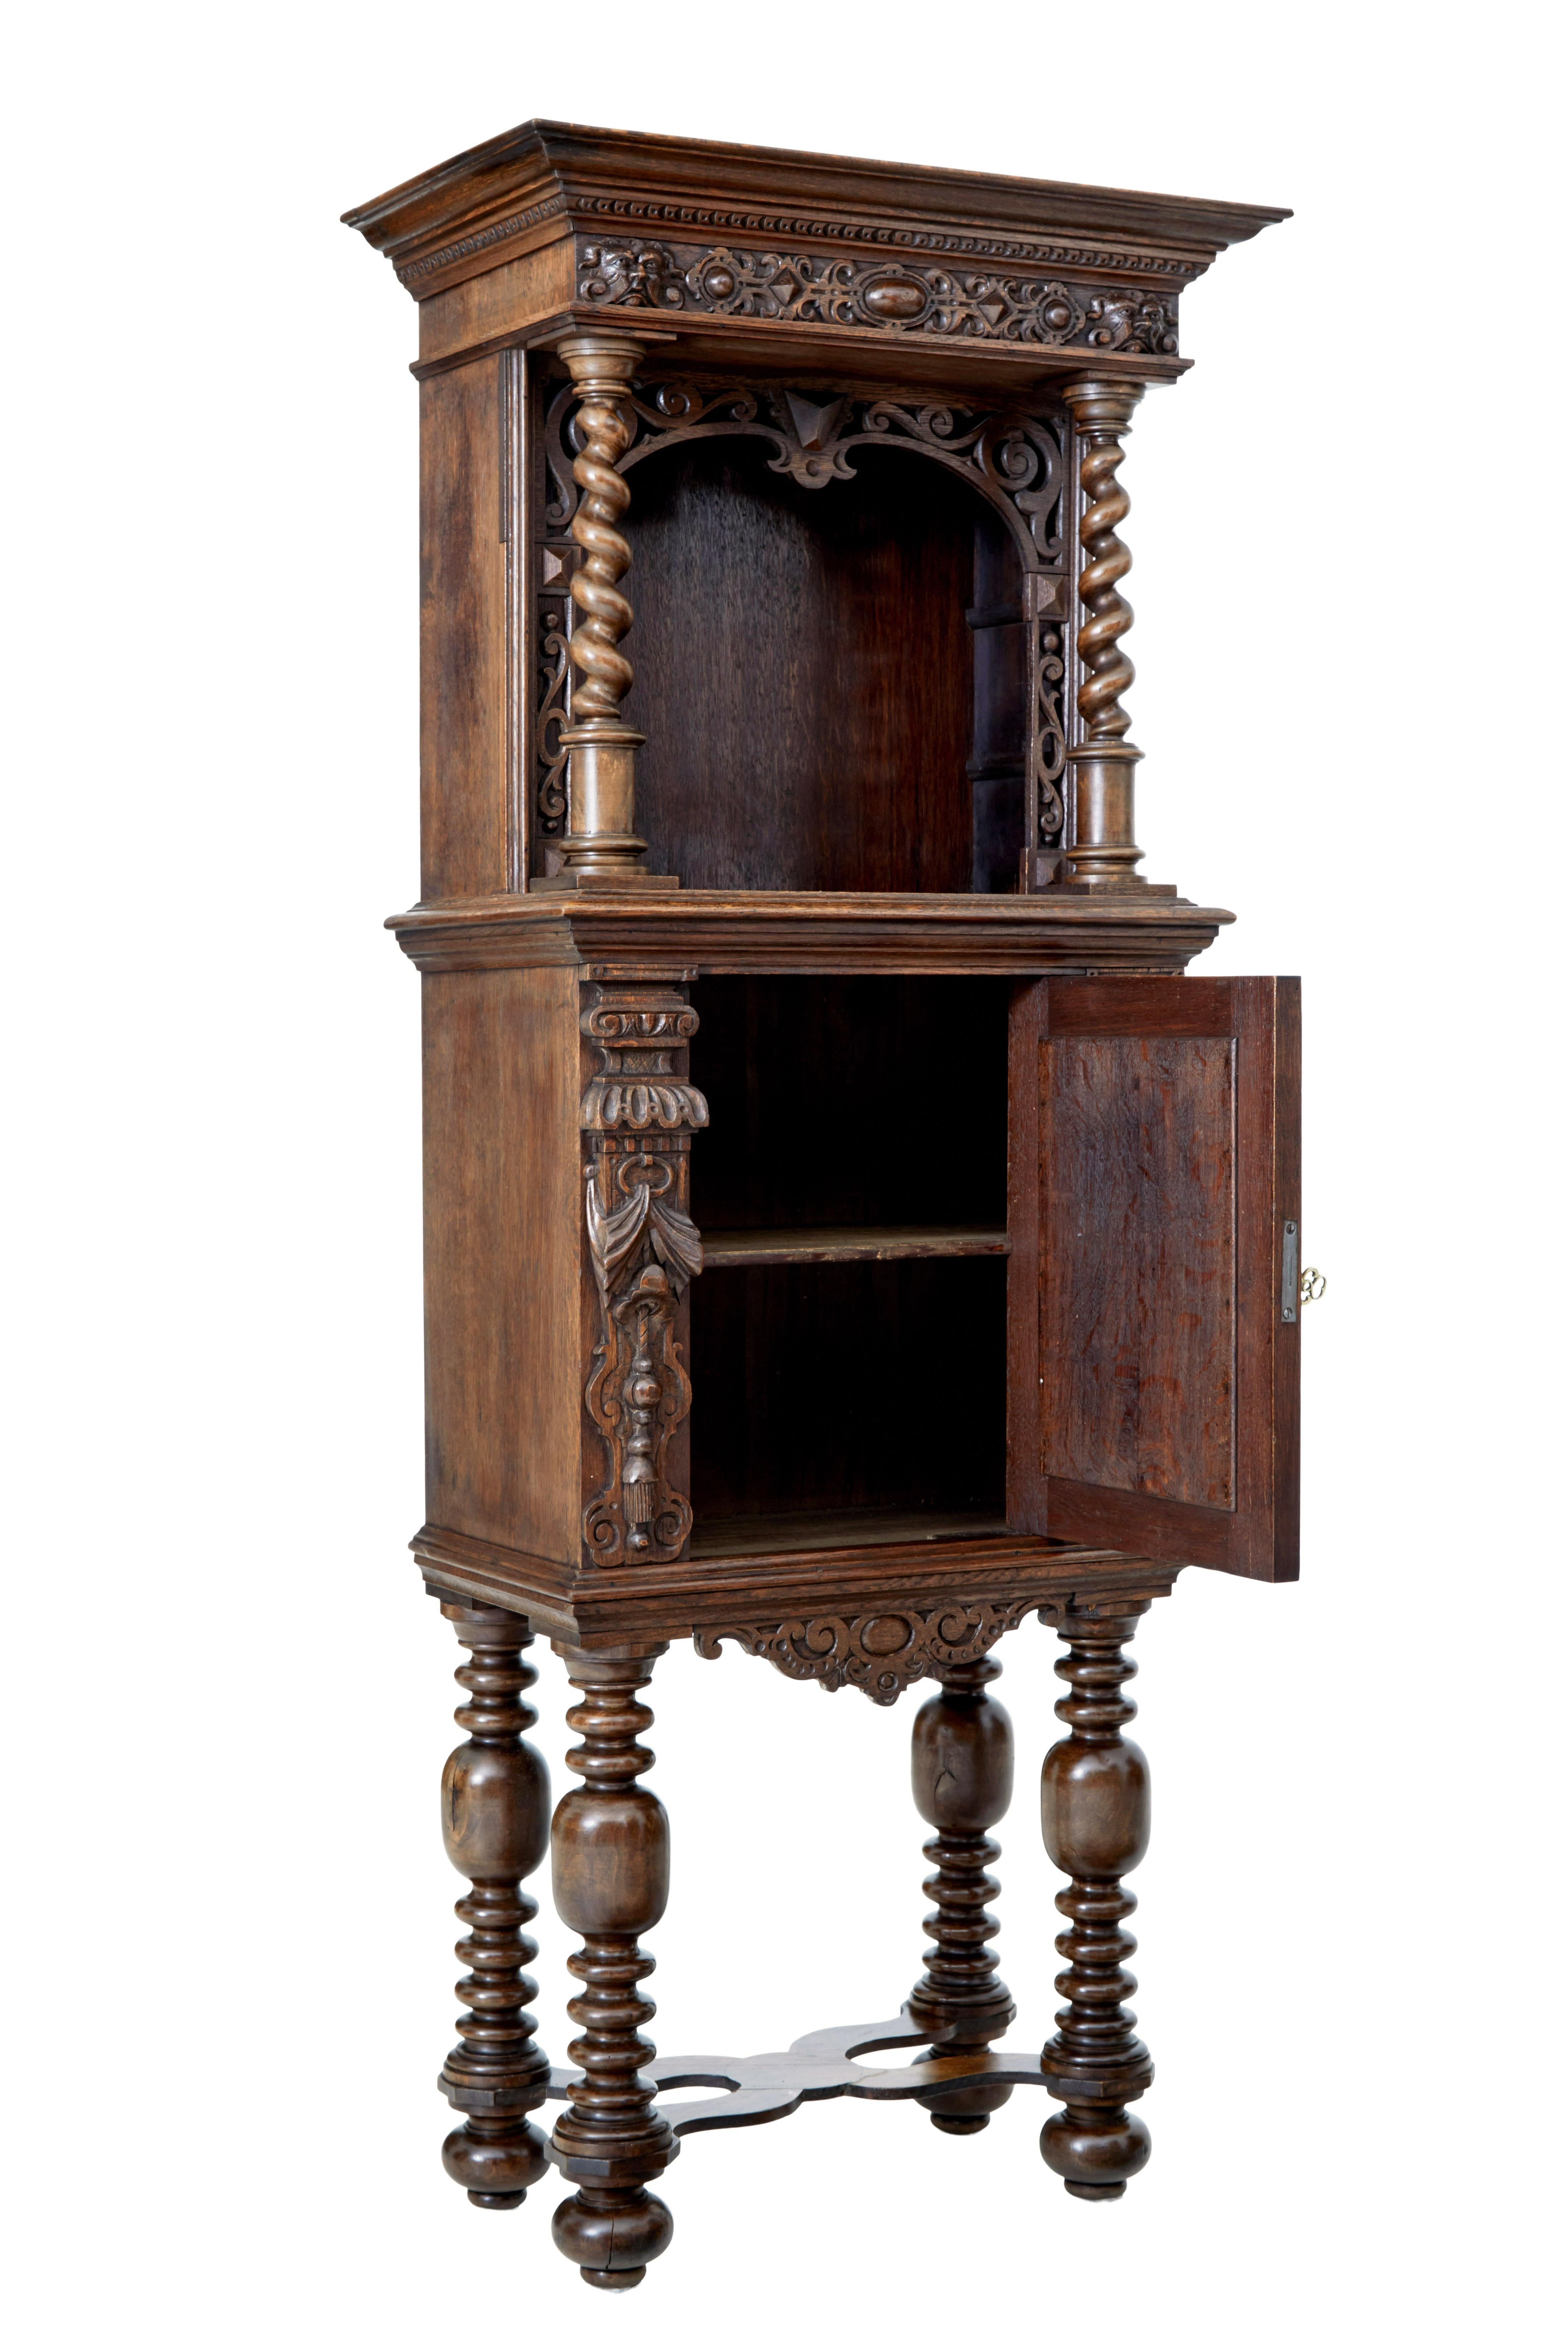 19th century flemish carved oak hall cupboard on stand, circa 1870.

Fine quality victorian oak hall cupboard, incorporating older carved elements. Main feature of this unusual piece is the carved adam and eve panel on the door. Comprising of 2